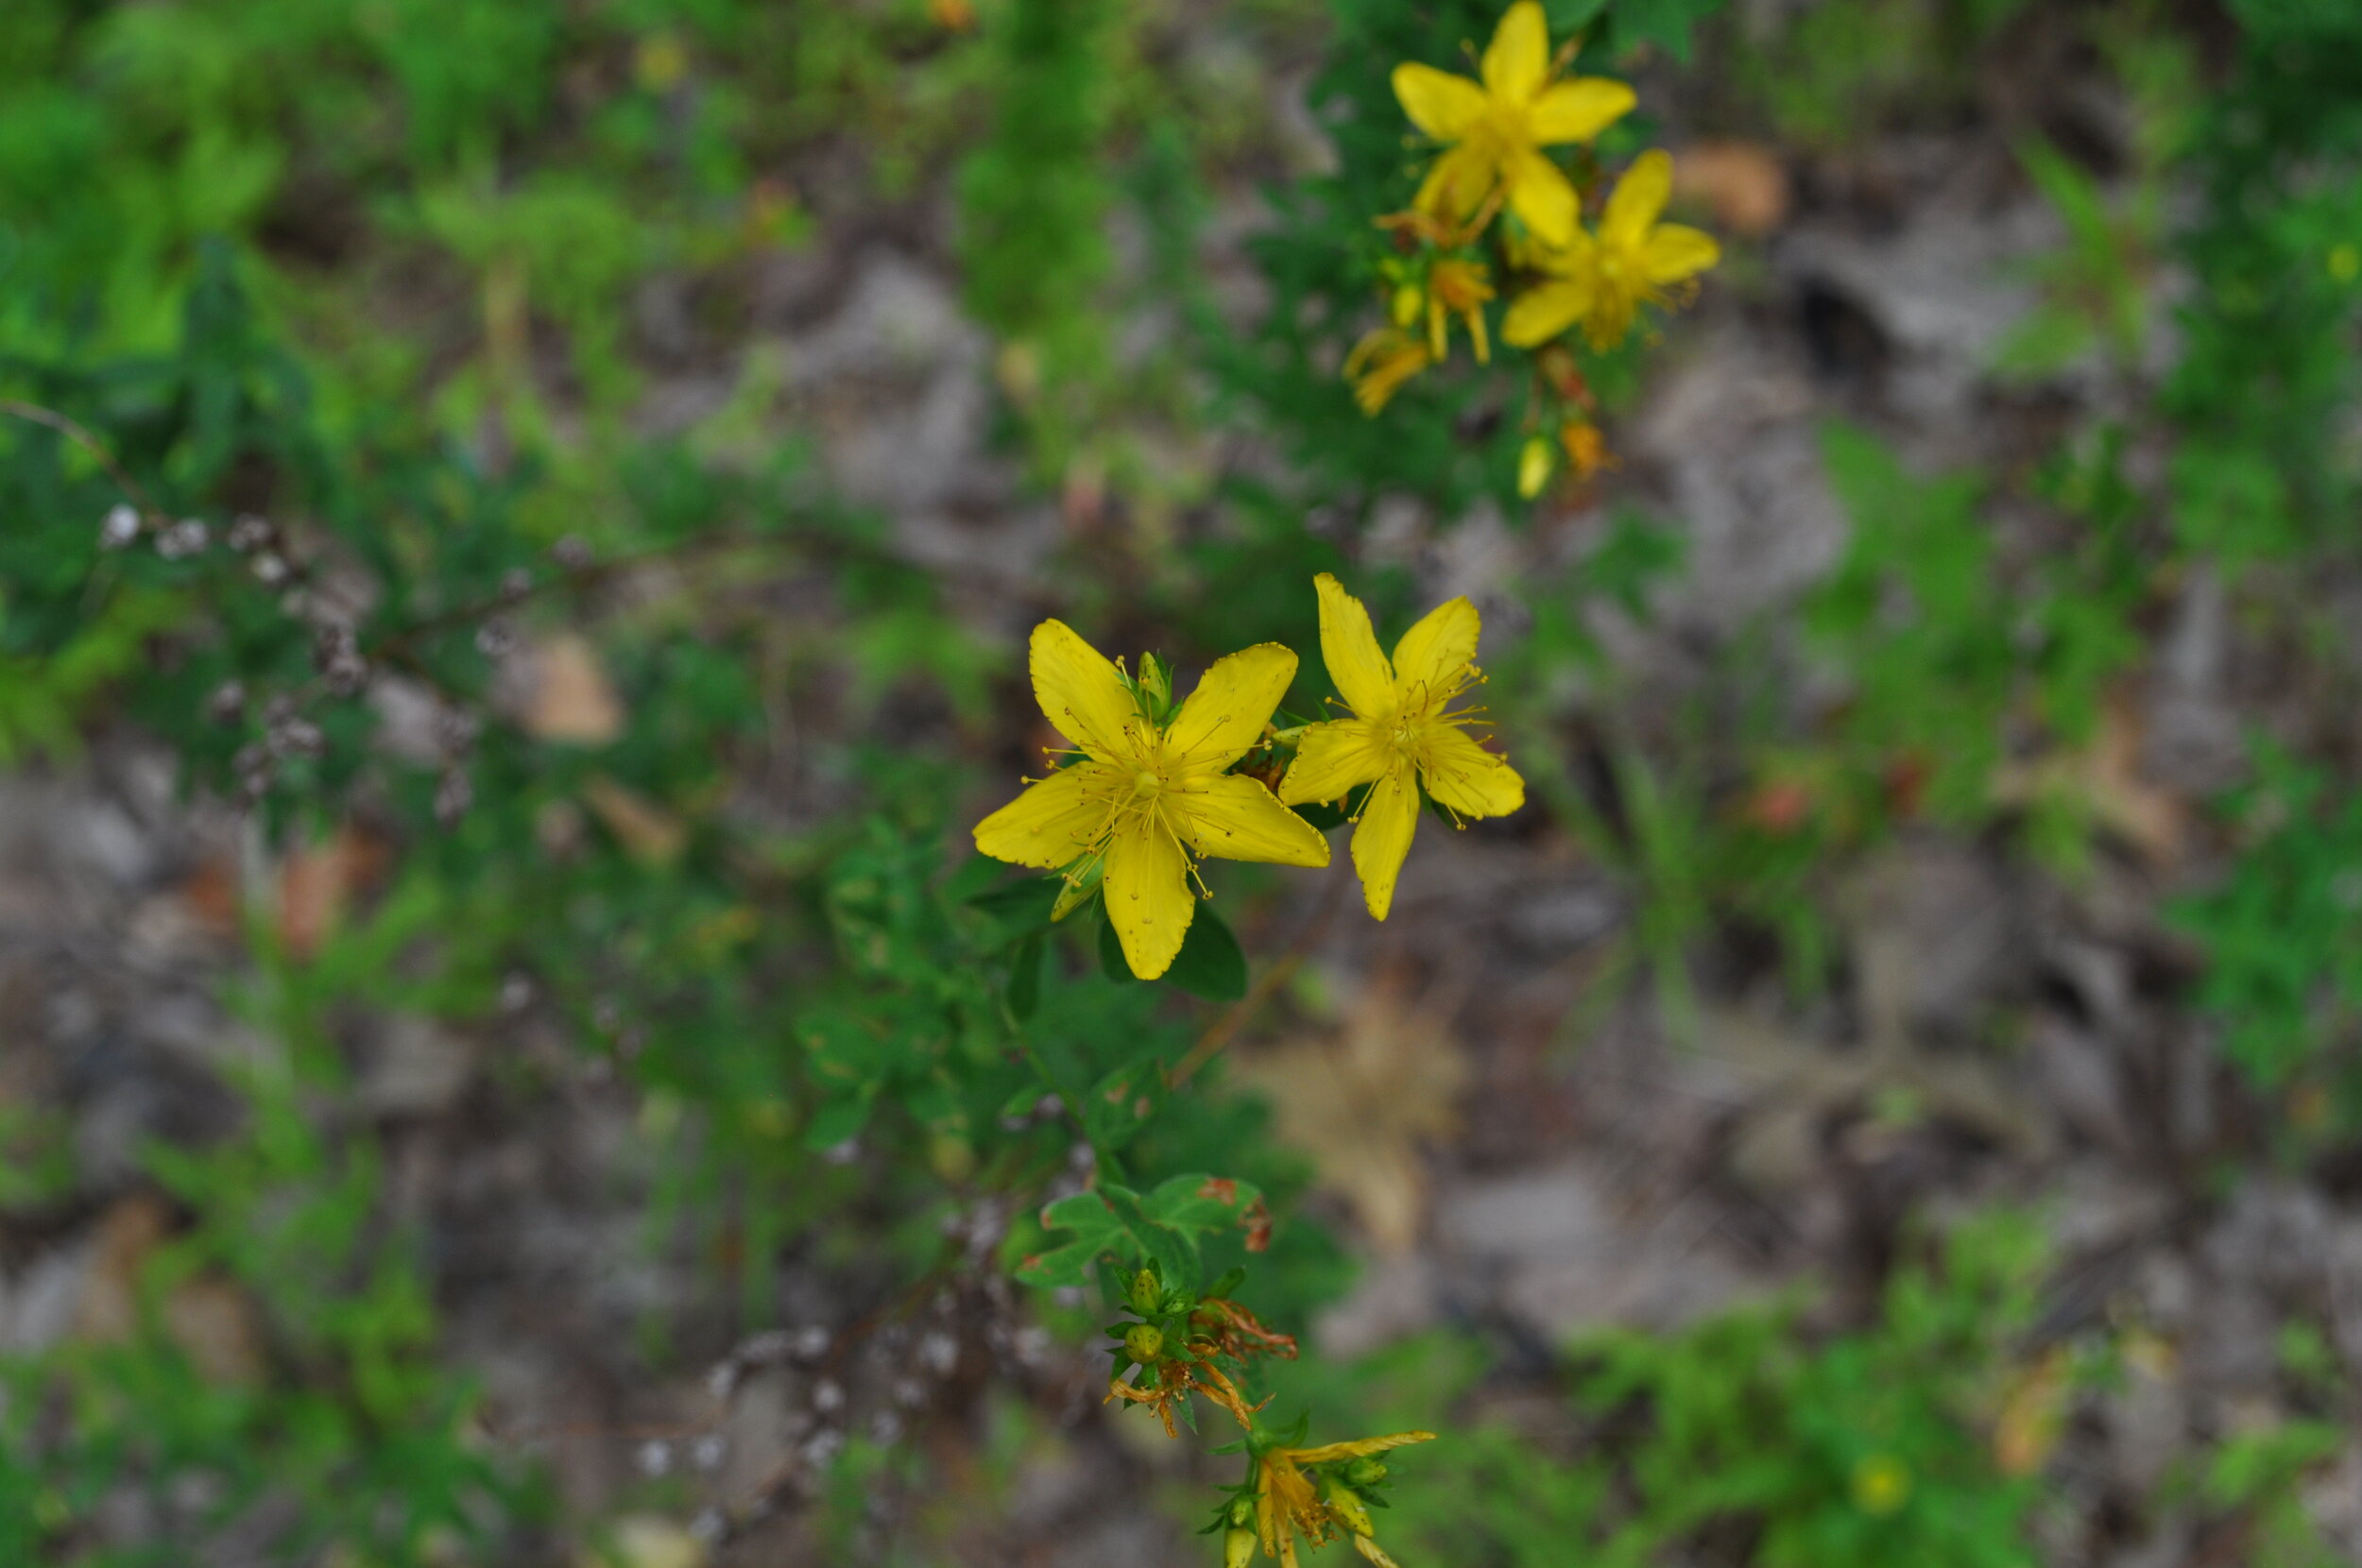 St. Johns Wort grows wild along roadways and in fields across North America. The plant is poisonous to livestock. Photo credit: Kaia Waxenberg